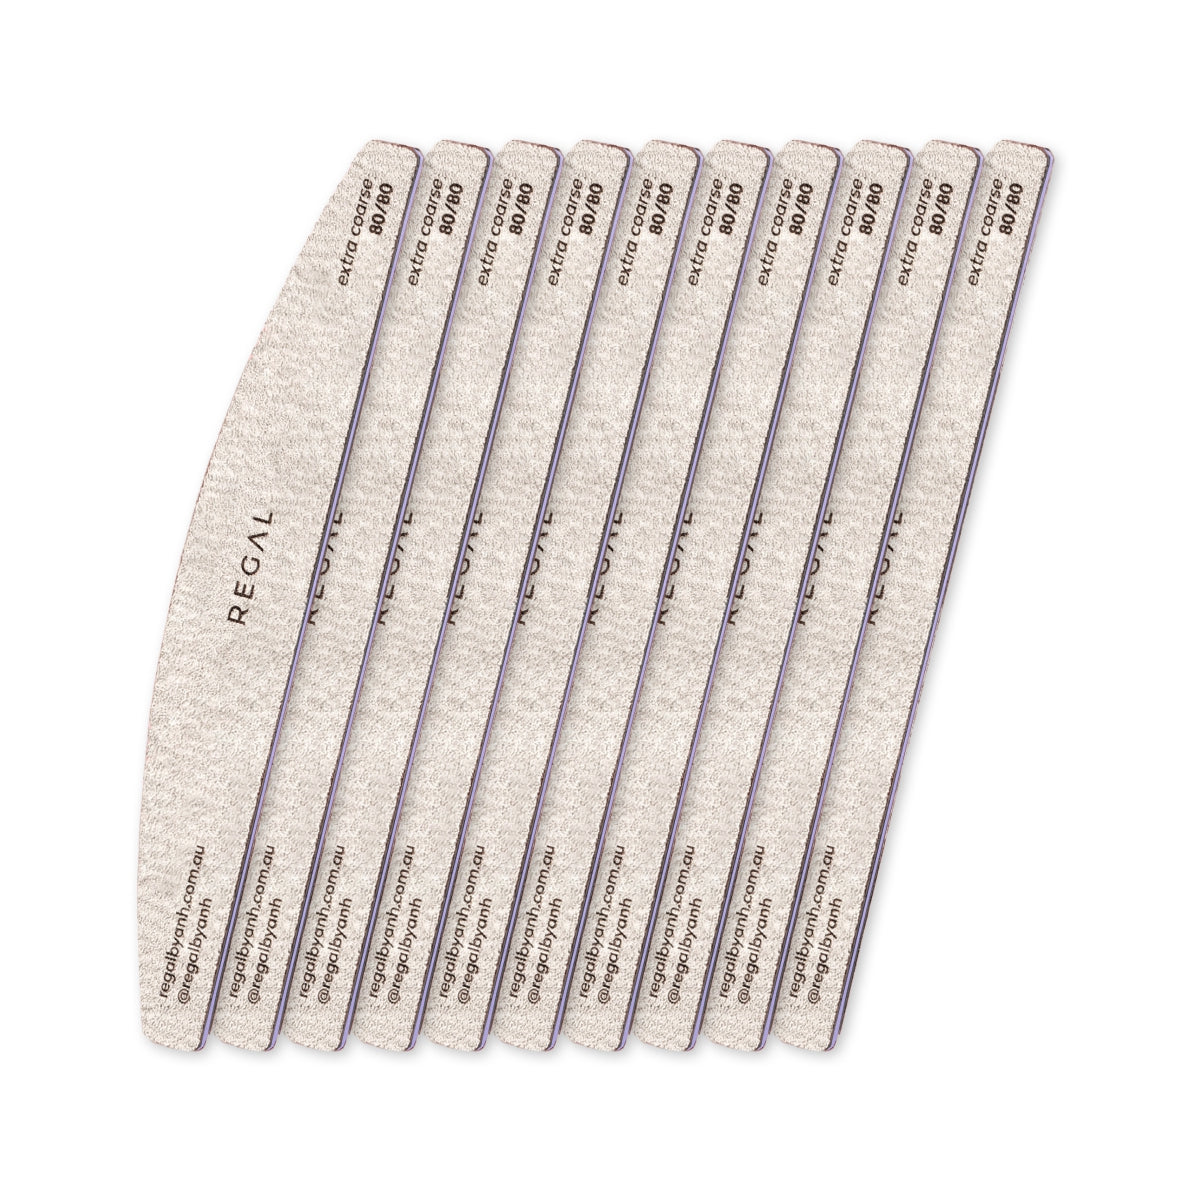 Regal by Anh Harbour Bridge Extra Coarse 80/80 Nail File 10 Pack